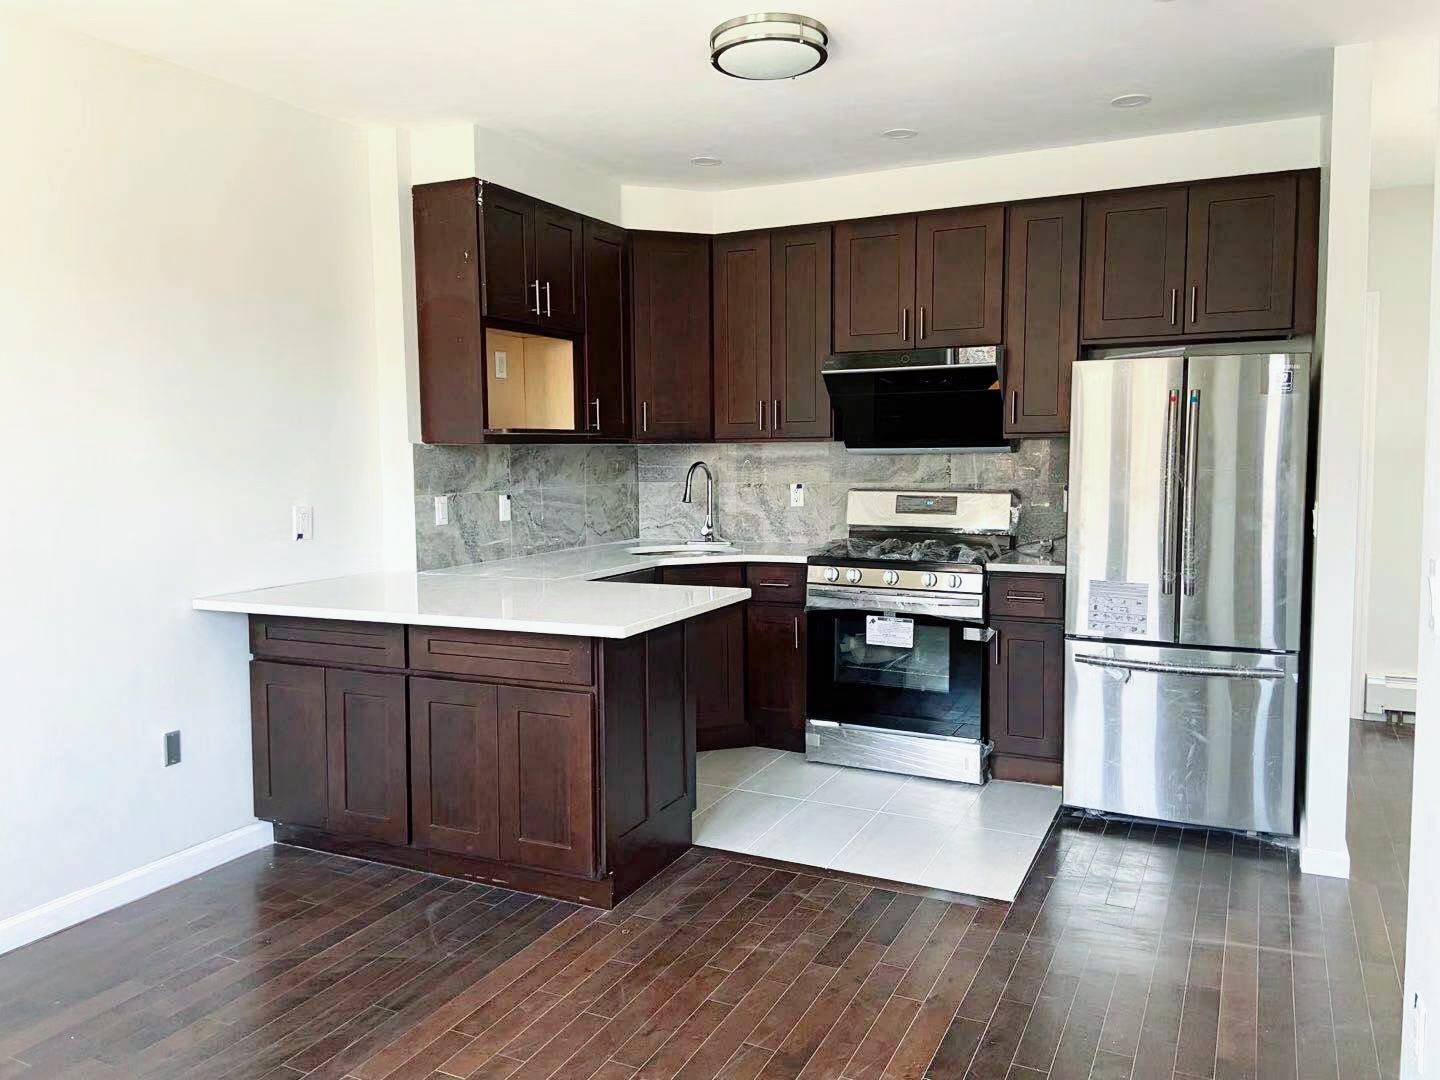 Gut Renovated amp ; Brand New 2 Bedroom 1 Bathroom Apartment located at the borders between LIC amp ; Astoria No Fee Apartment Separate entrance for this brand new apartment.